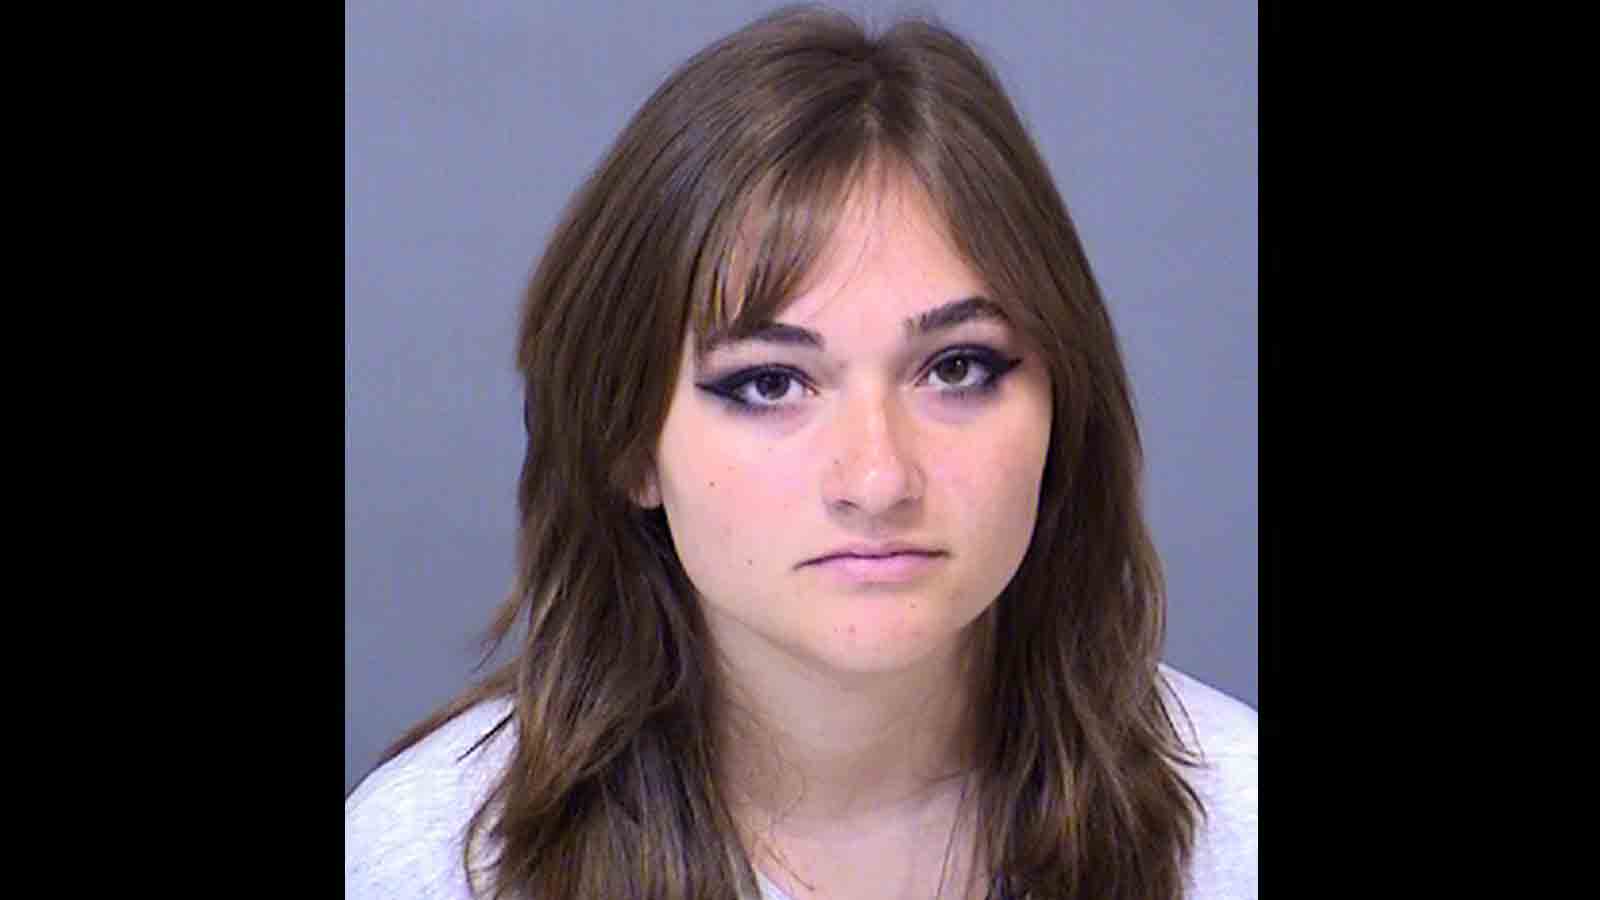 Rachel Nicole Berg was booked into jail on one count of reckless manslaughter after authorities say...